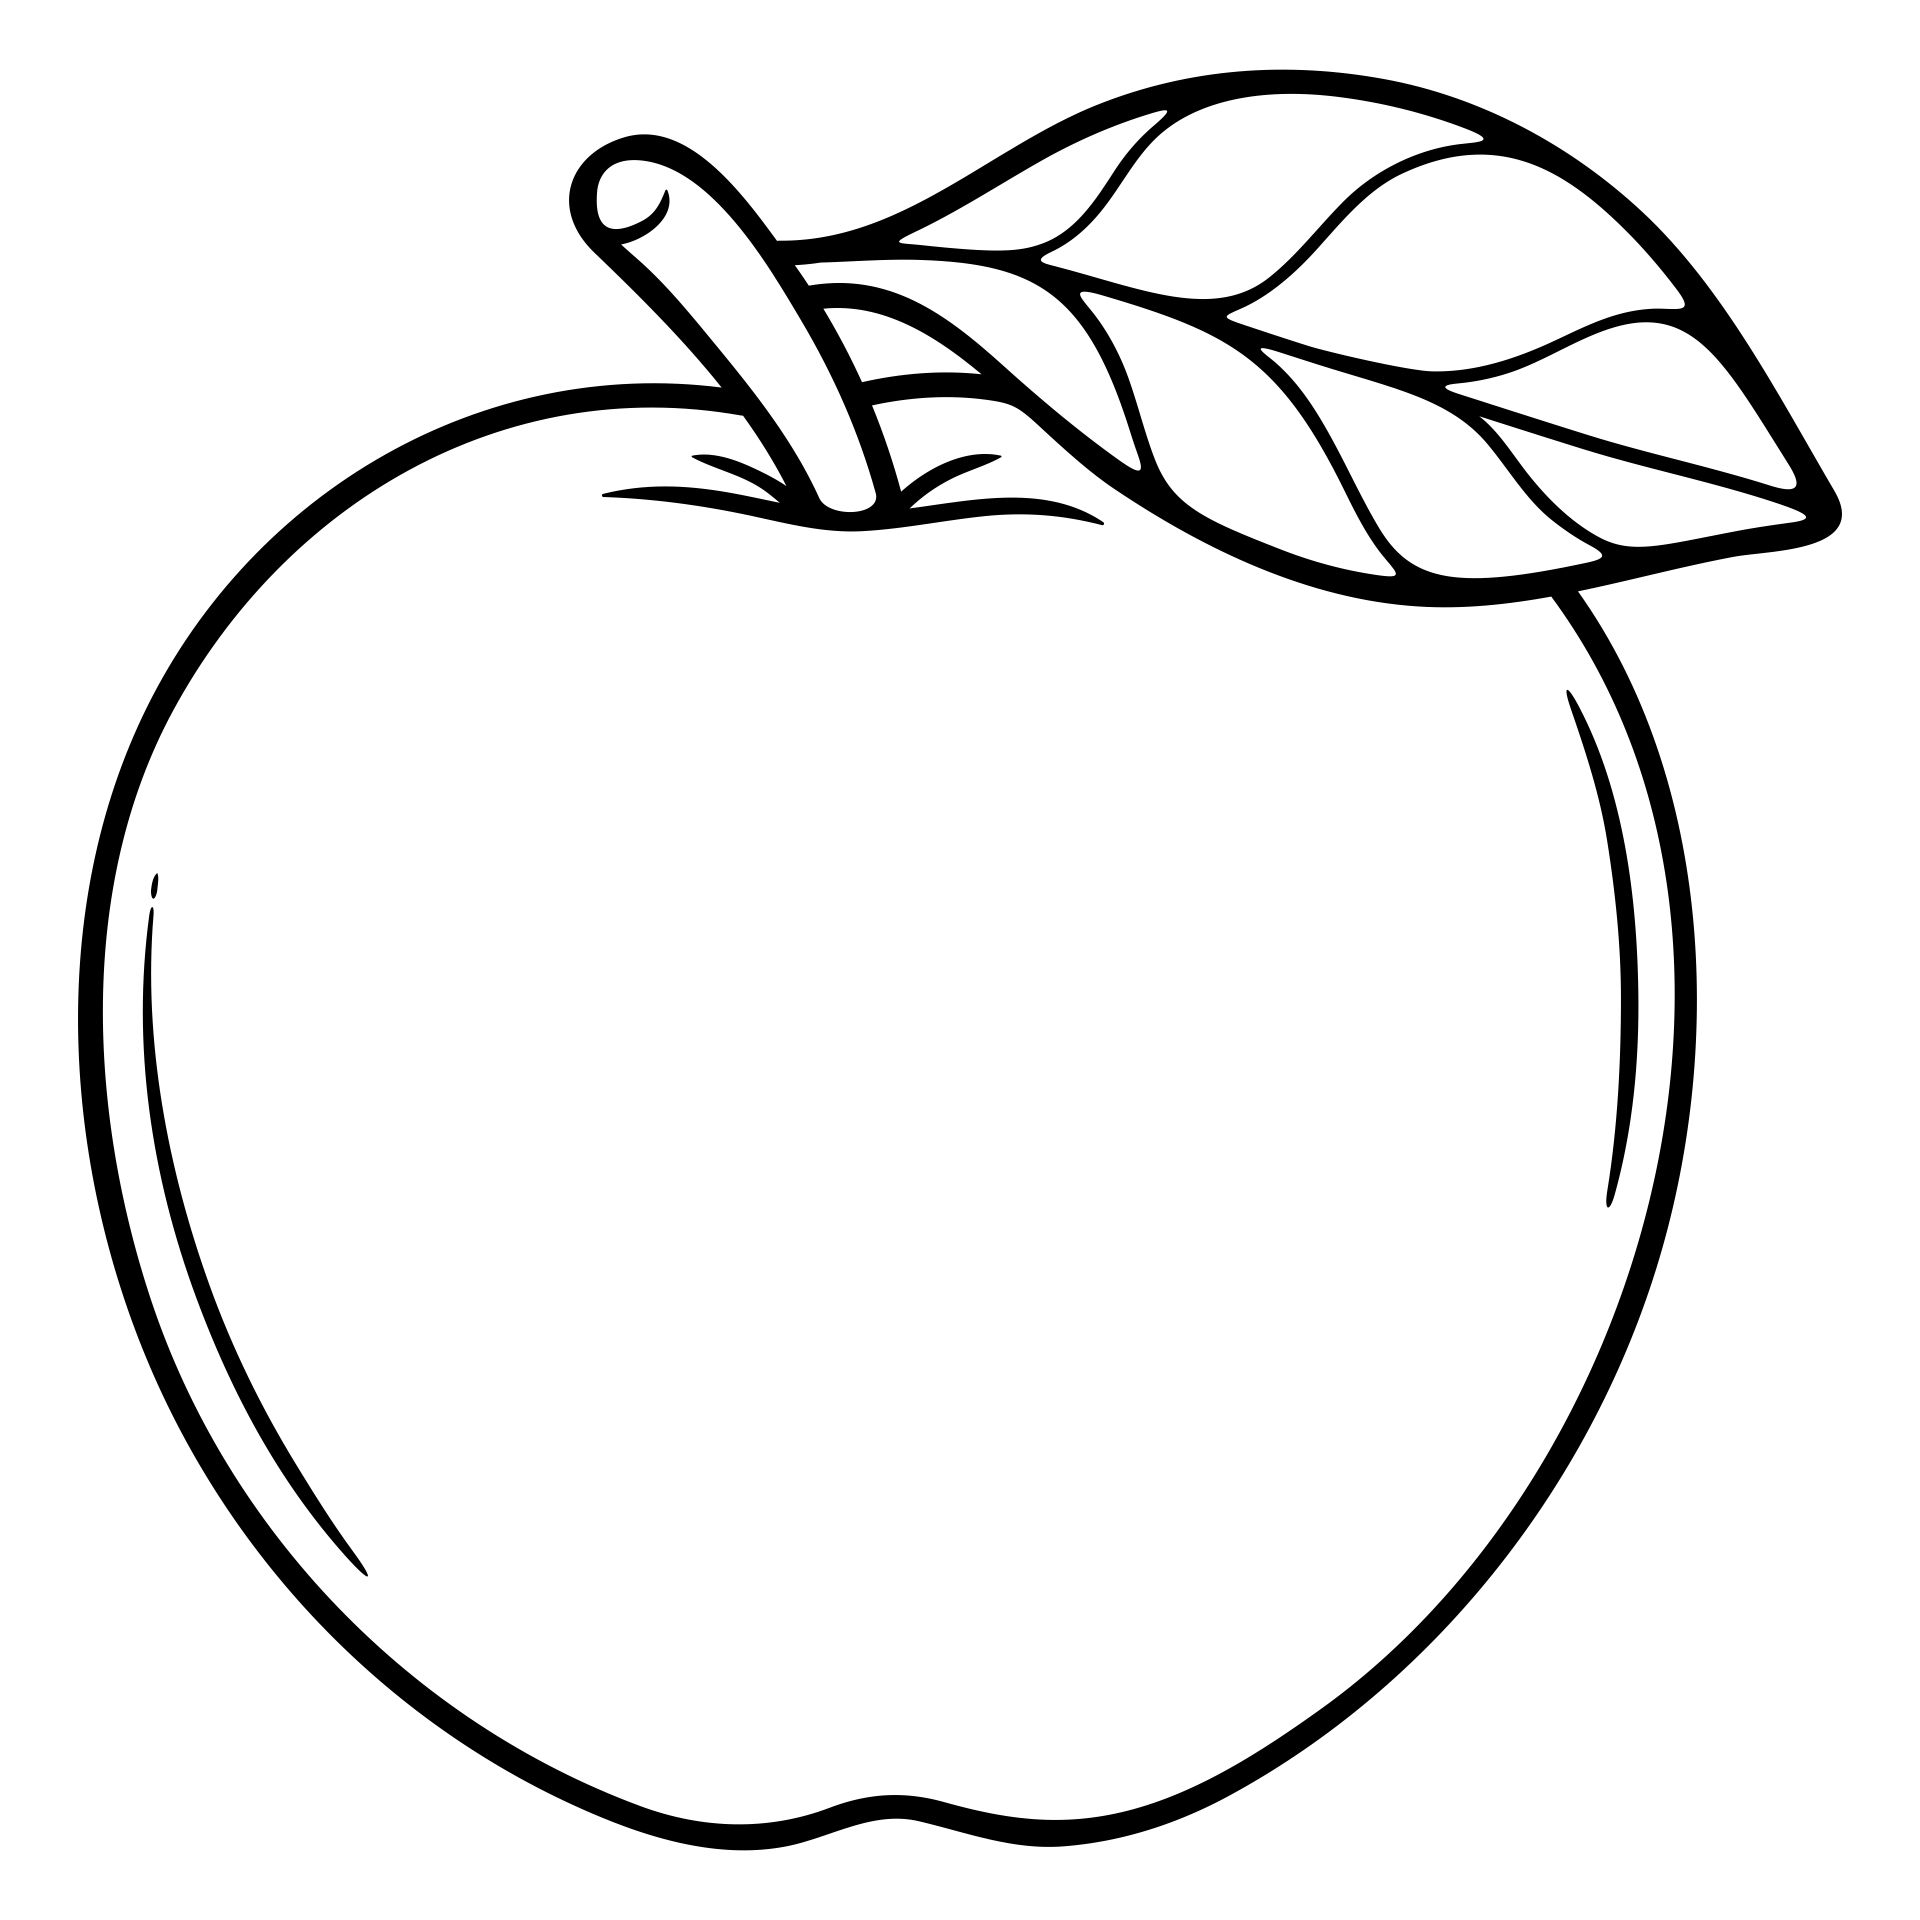 Apple Template Coloring Page